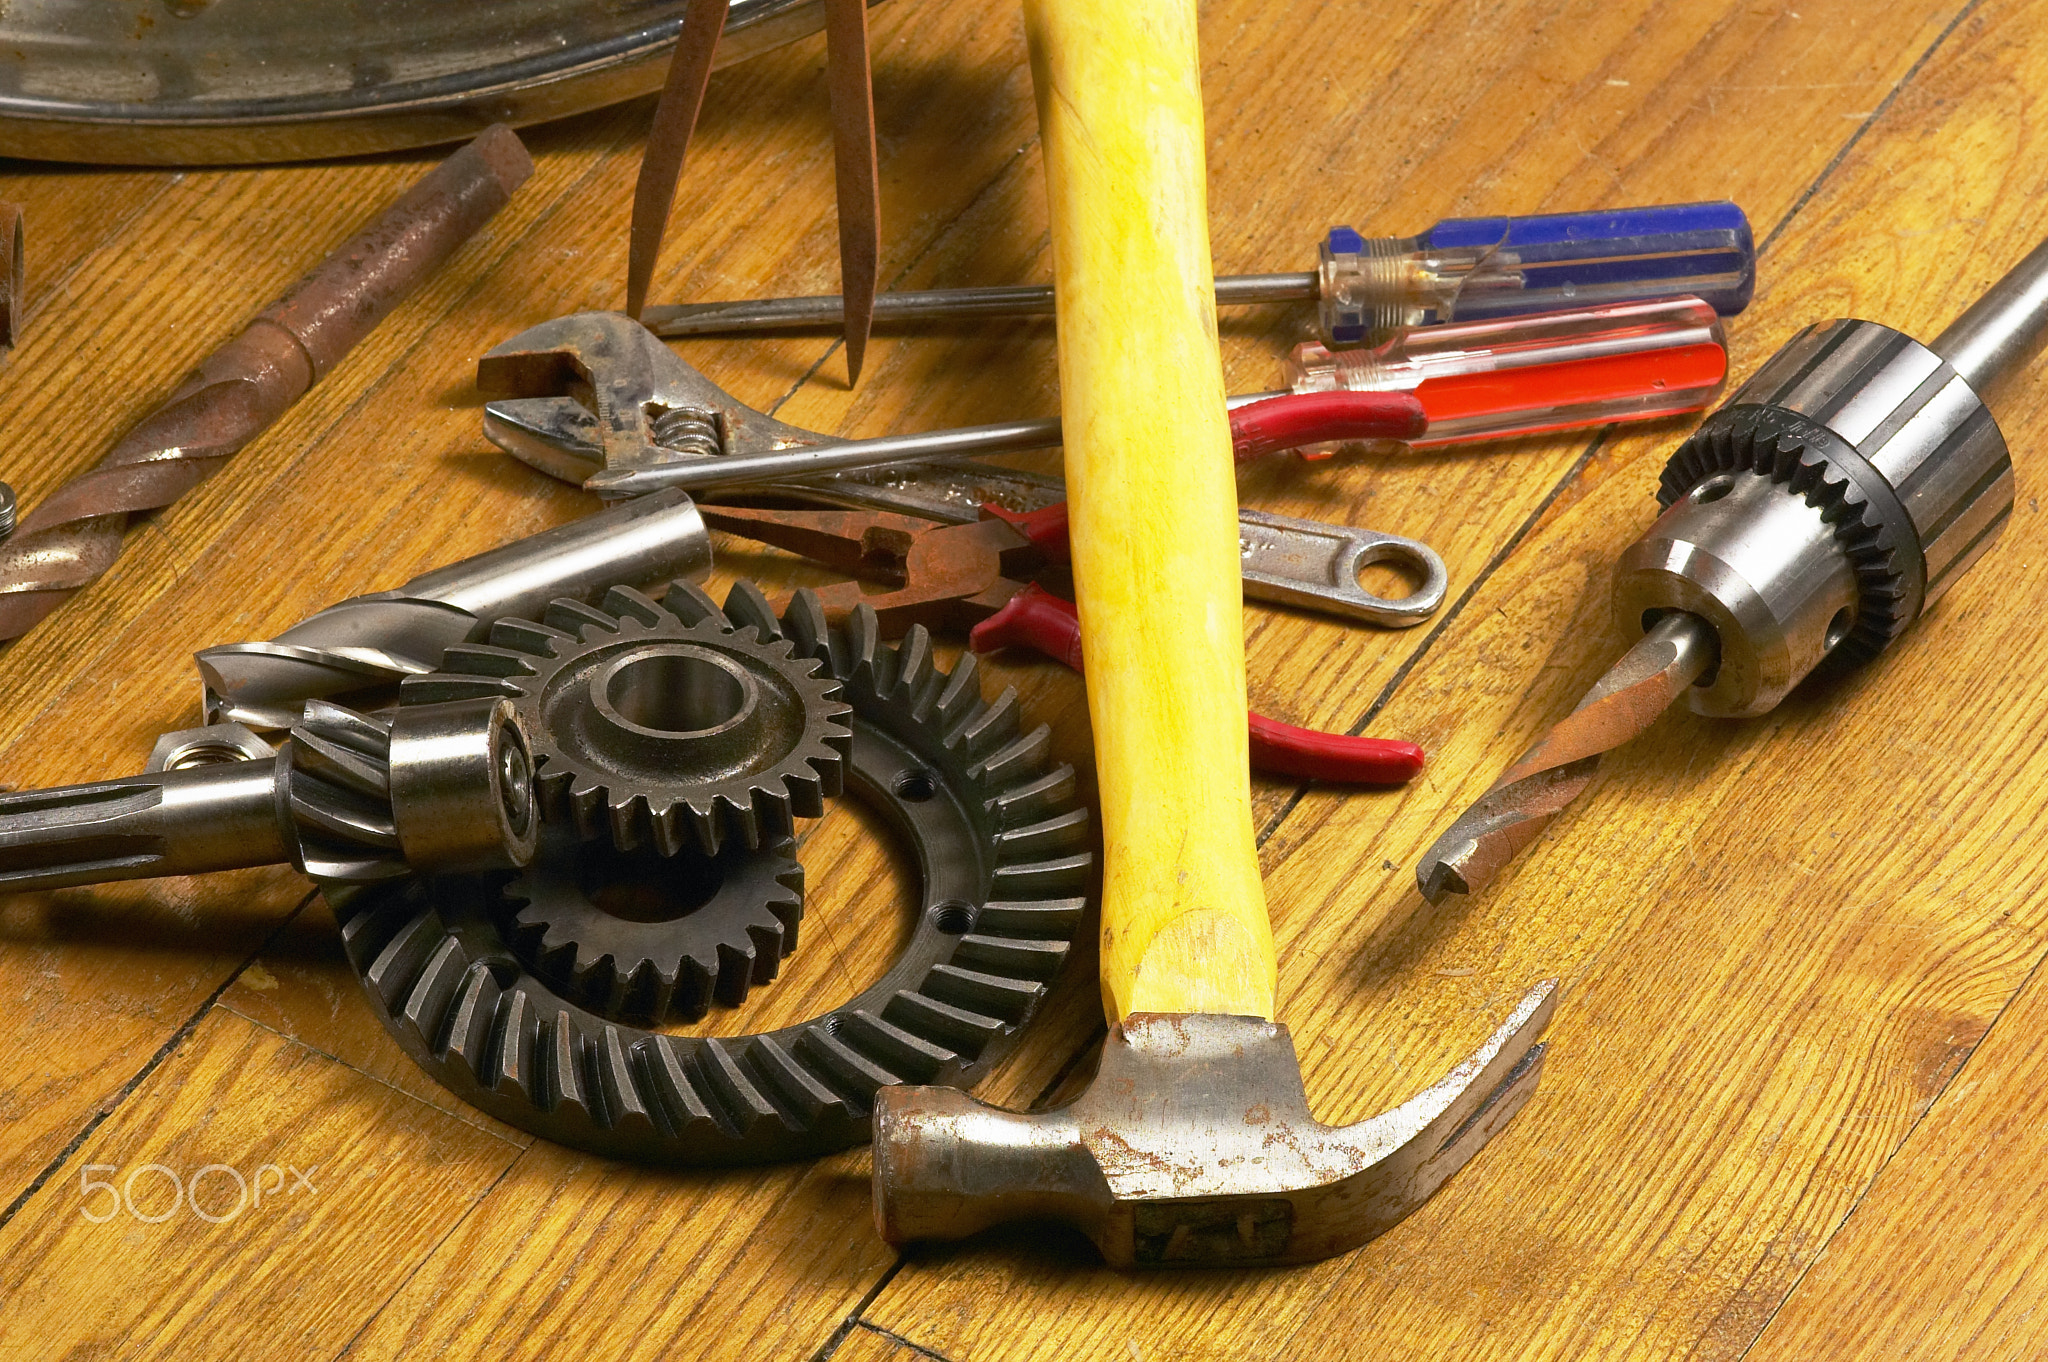 tools and gear